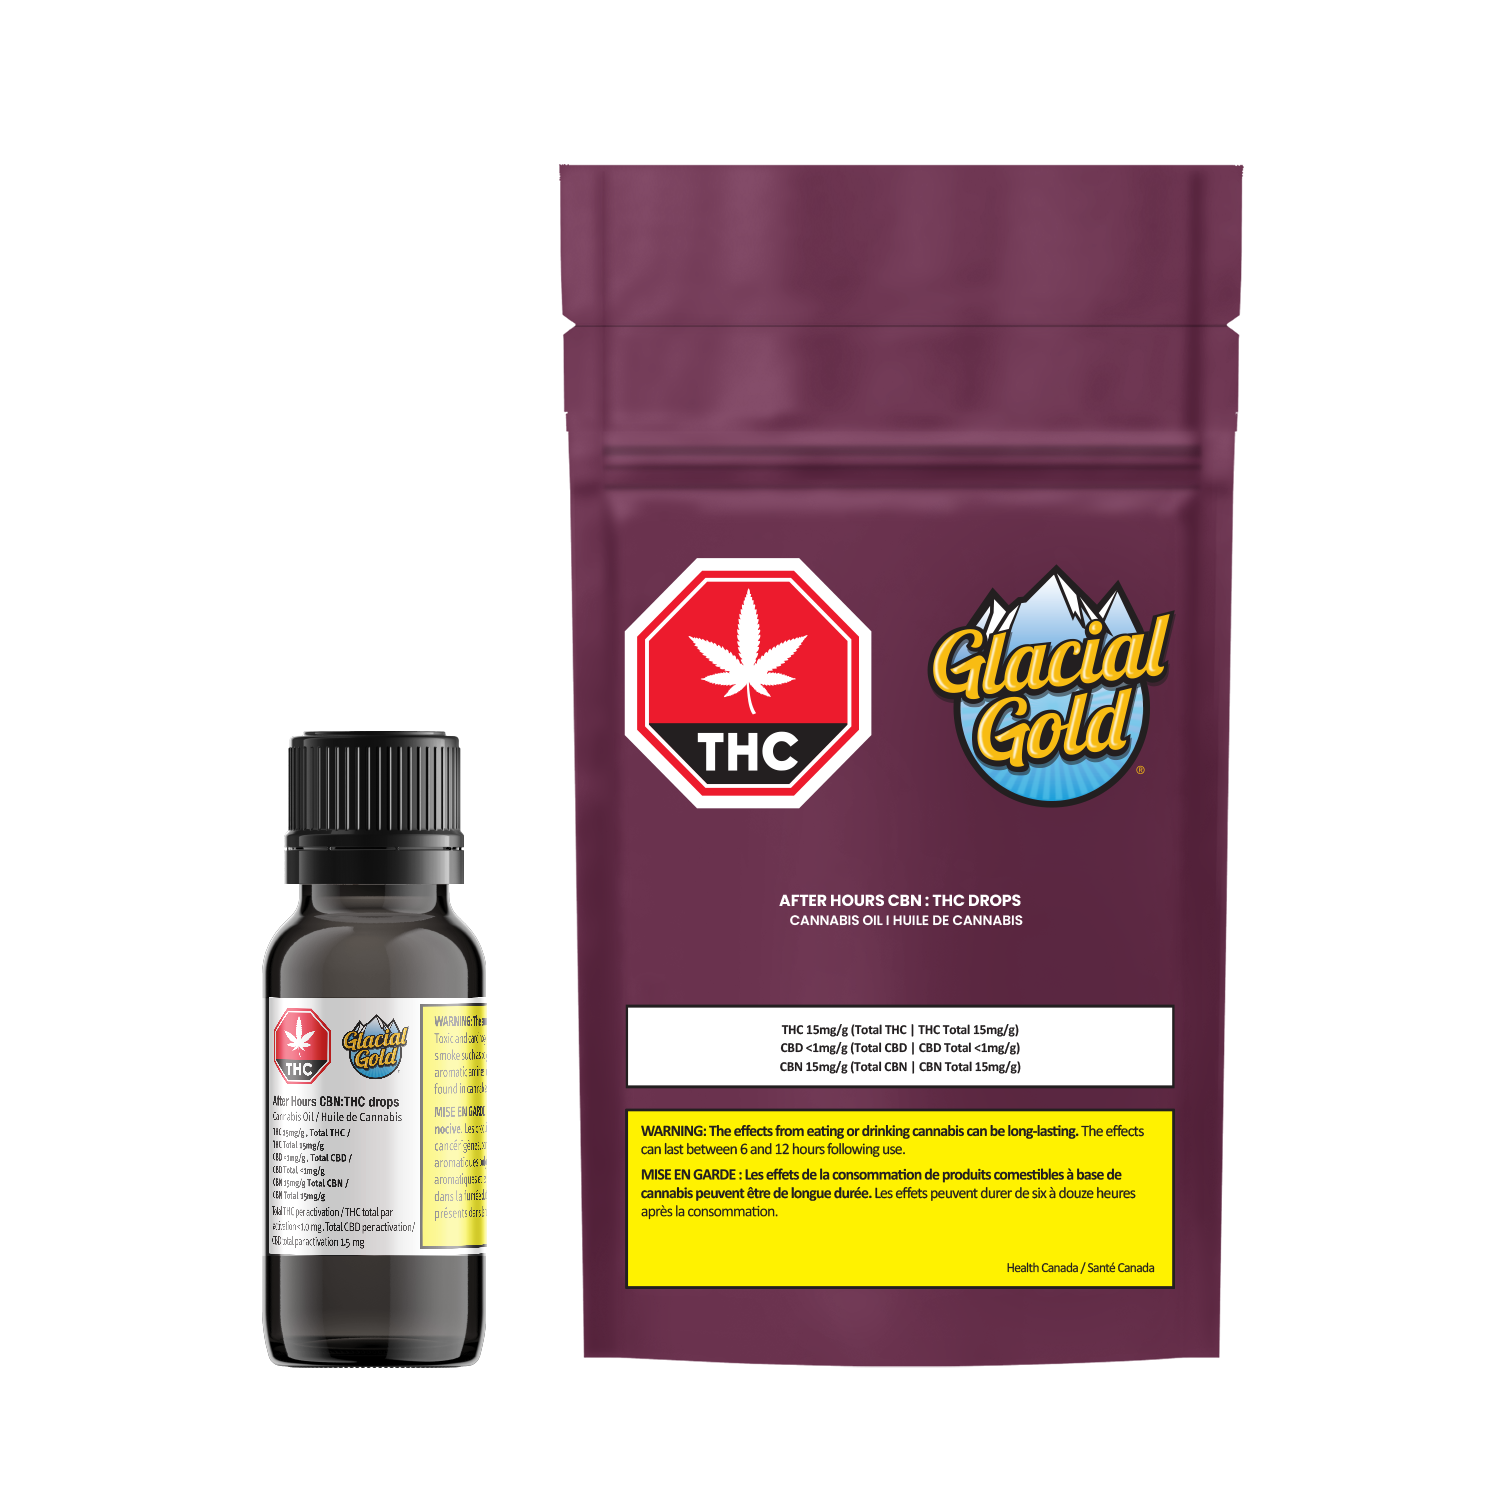 Cannabis Product Glacial Gold - After Hours CBN:THC Drops by Glacial Gold - 1